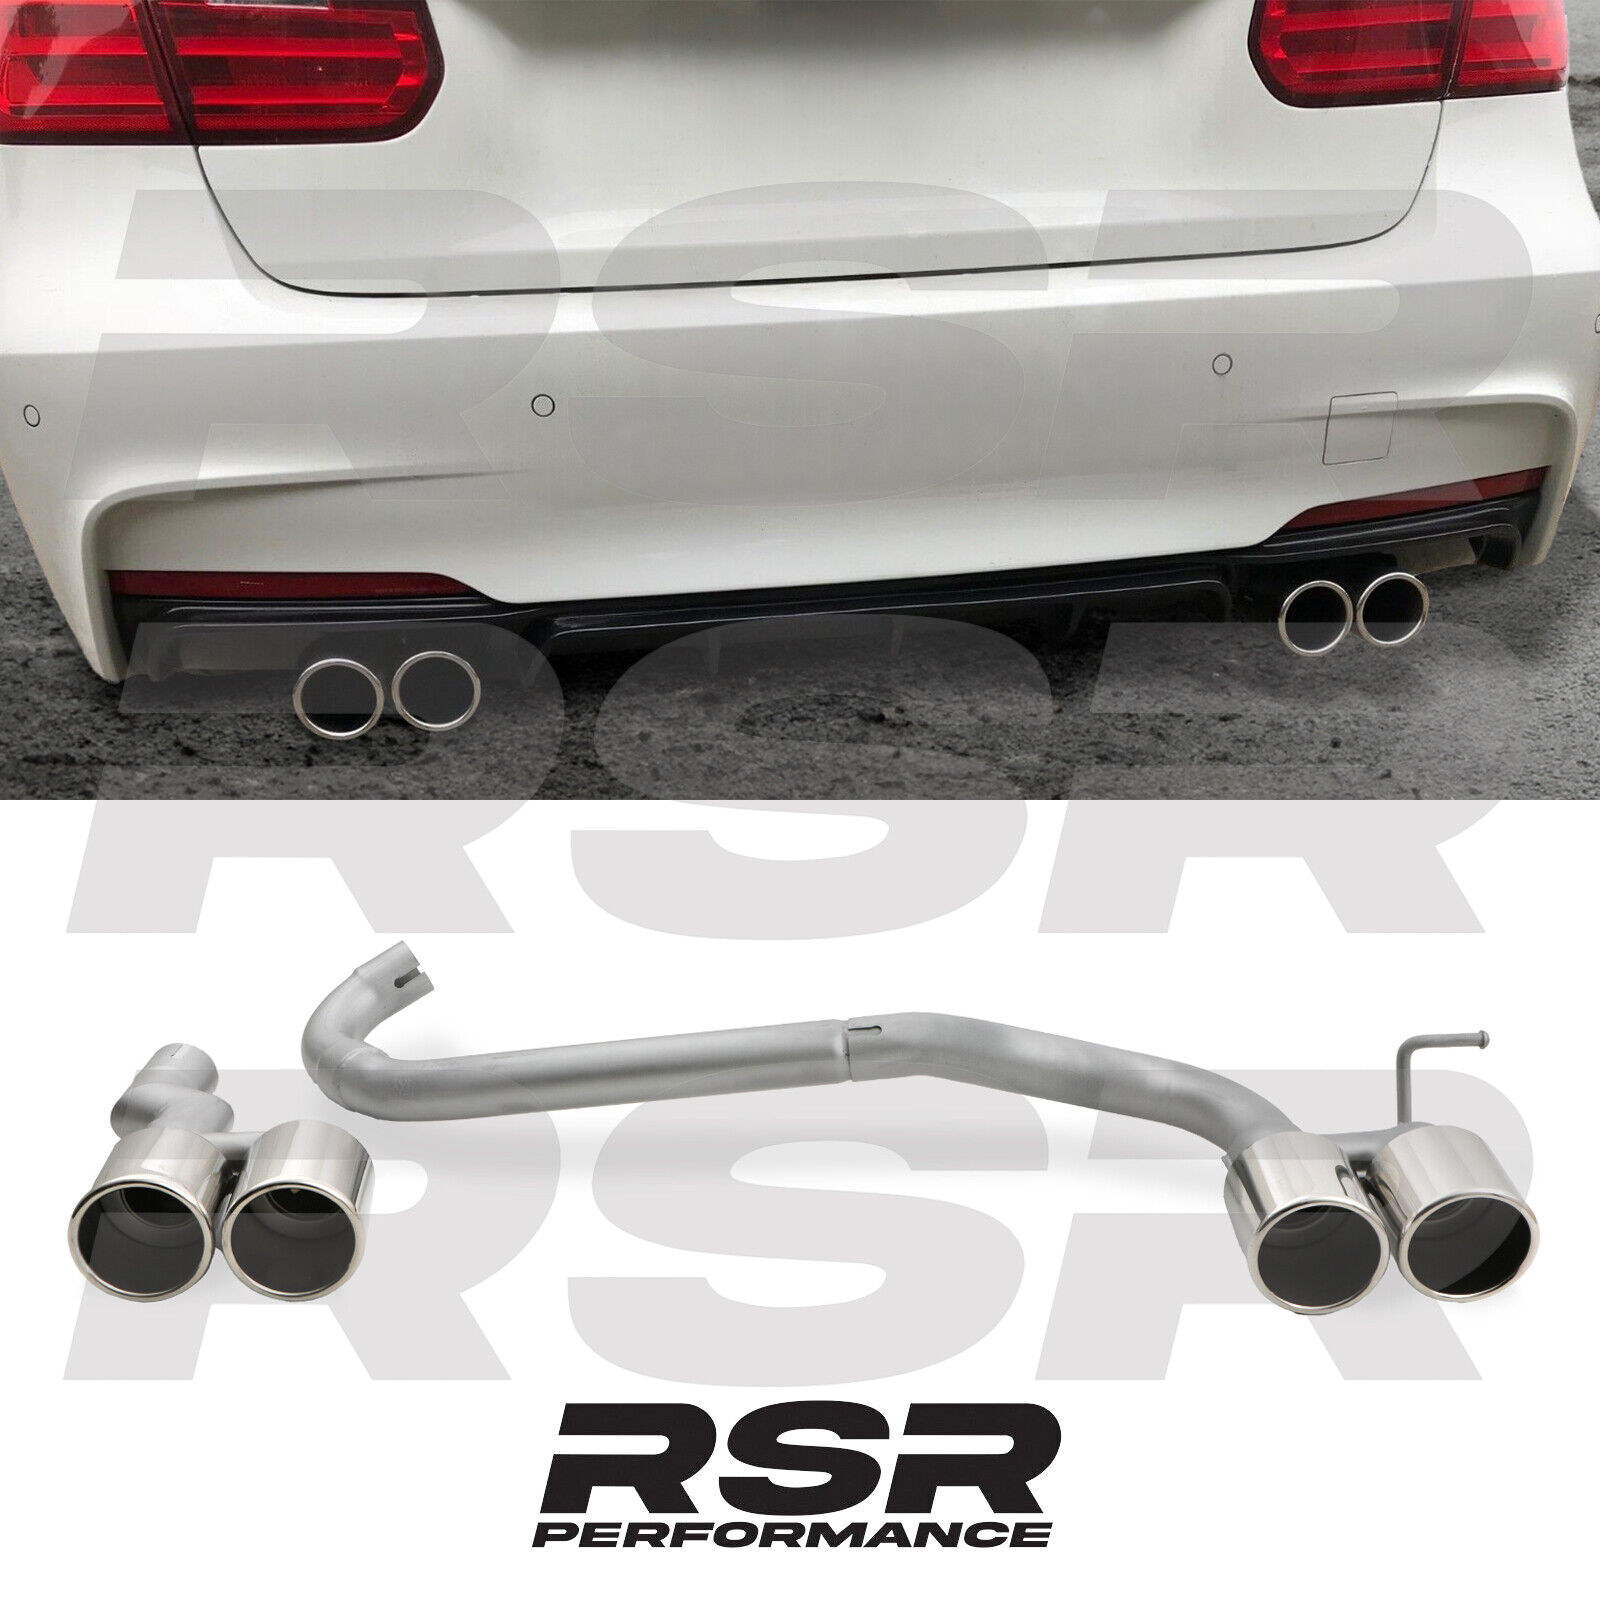 M3 STYLE QUAD TIP EXHAUST TAILPIPE CONVERSION KIT FOR BMW 3 SERIES F30 B48 12-19